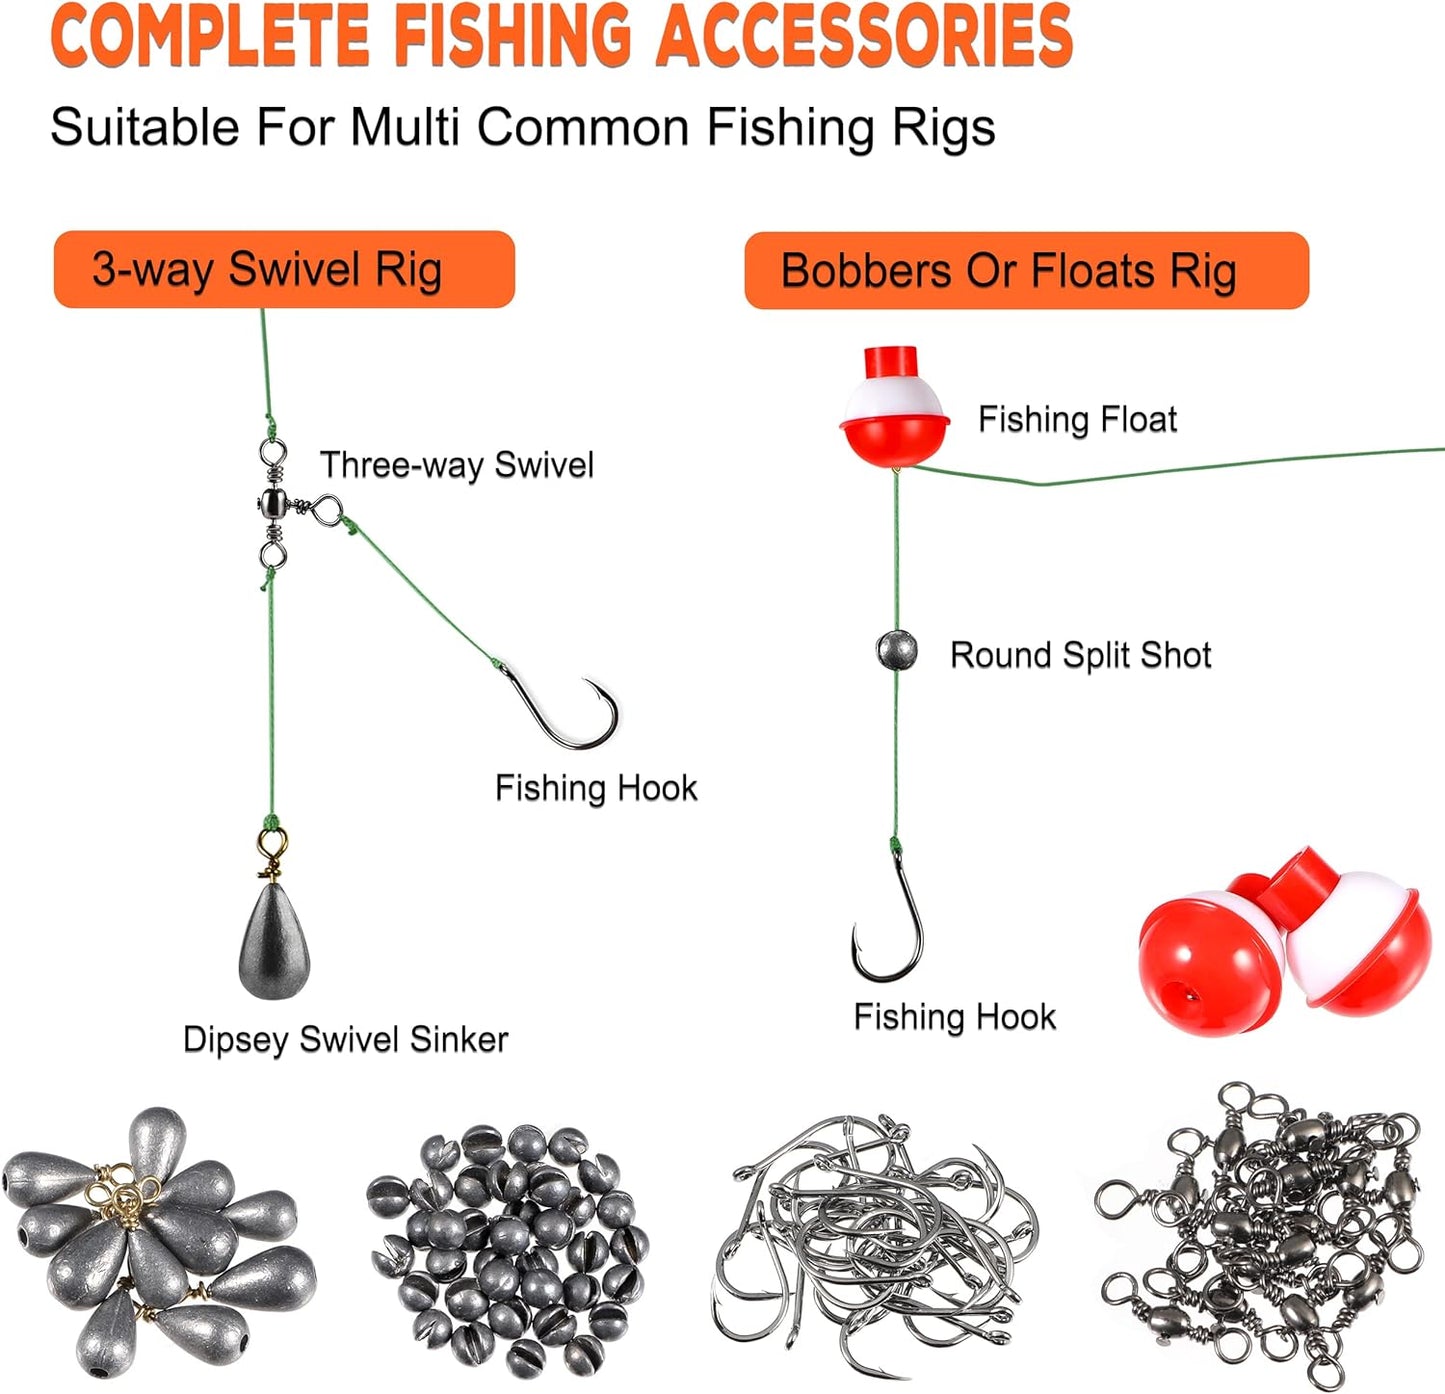 253/108Pcs Fishing Accessories Kit, Fishing Tackle Box with Tackle Included, Fishing Hooks, Fishing Weights, Spinner Blade, Fishing Gear for Bass, Bluegill, Crappie